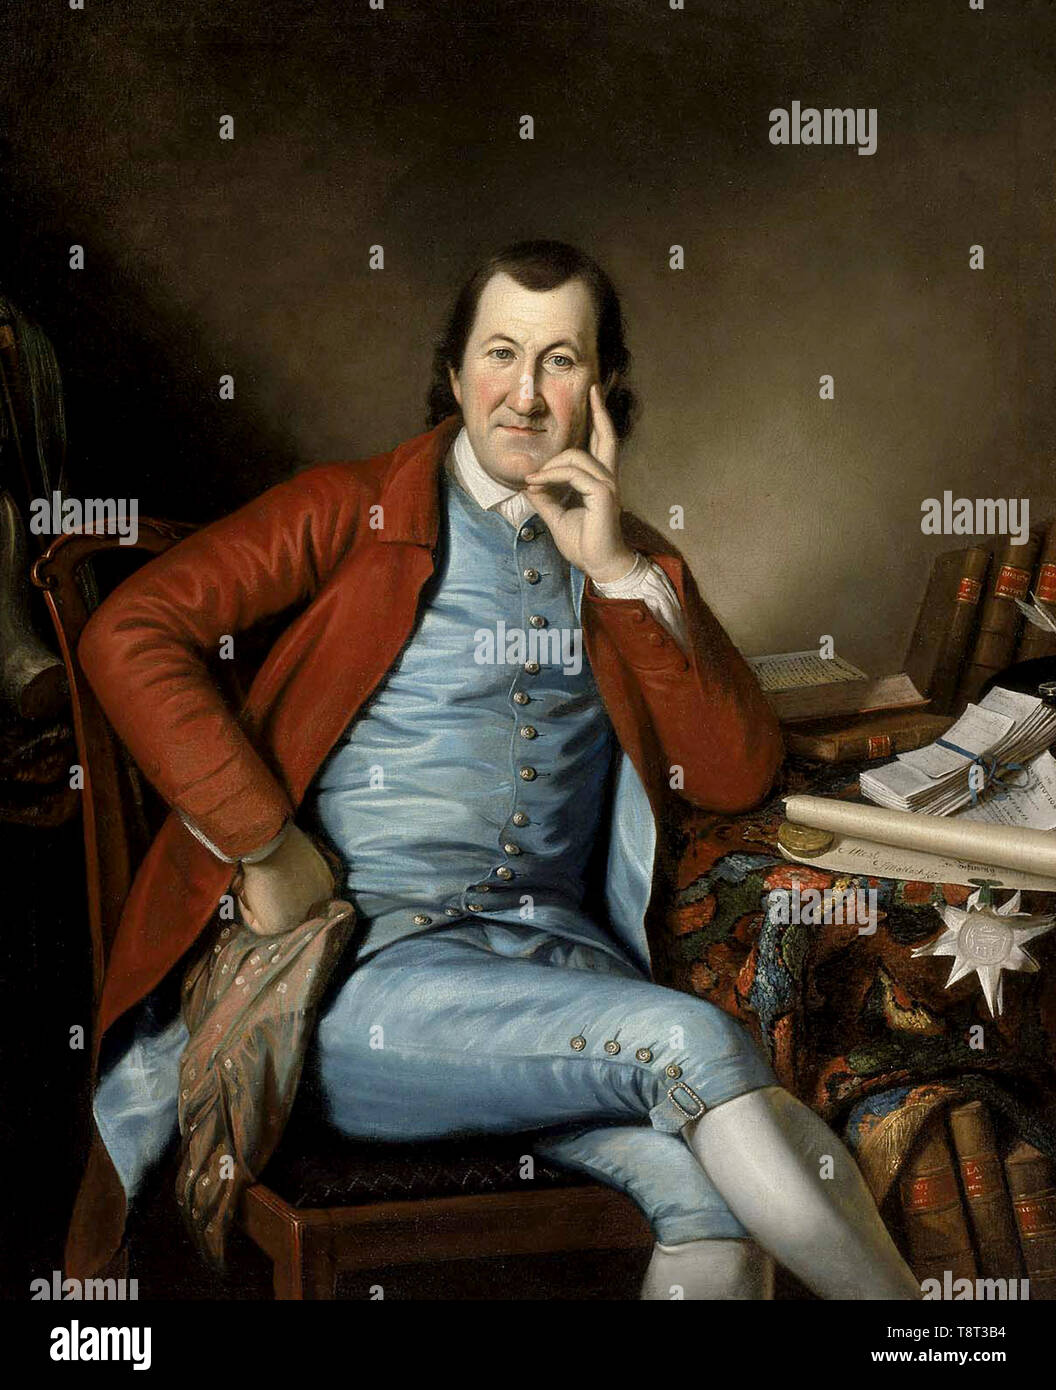 Timothy Matlack (1730 – 1829) brewer and beer bottler who emerged as a popular and powerful leader in the American Revolutionary War, painting by Charles Willson Peale, 1790 Stock Photo